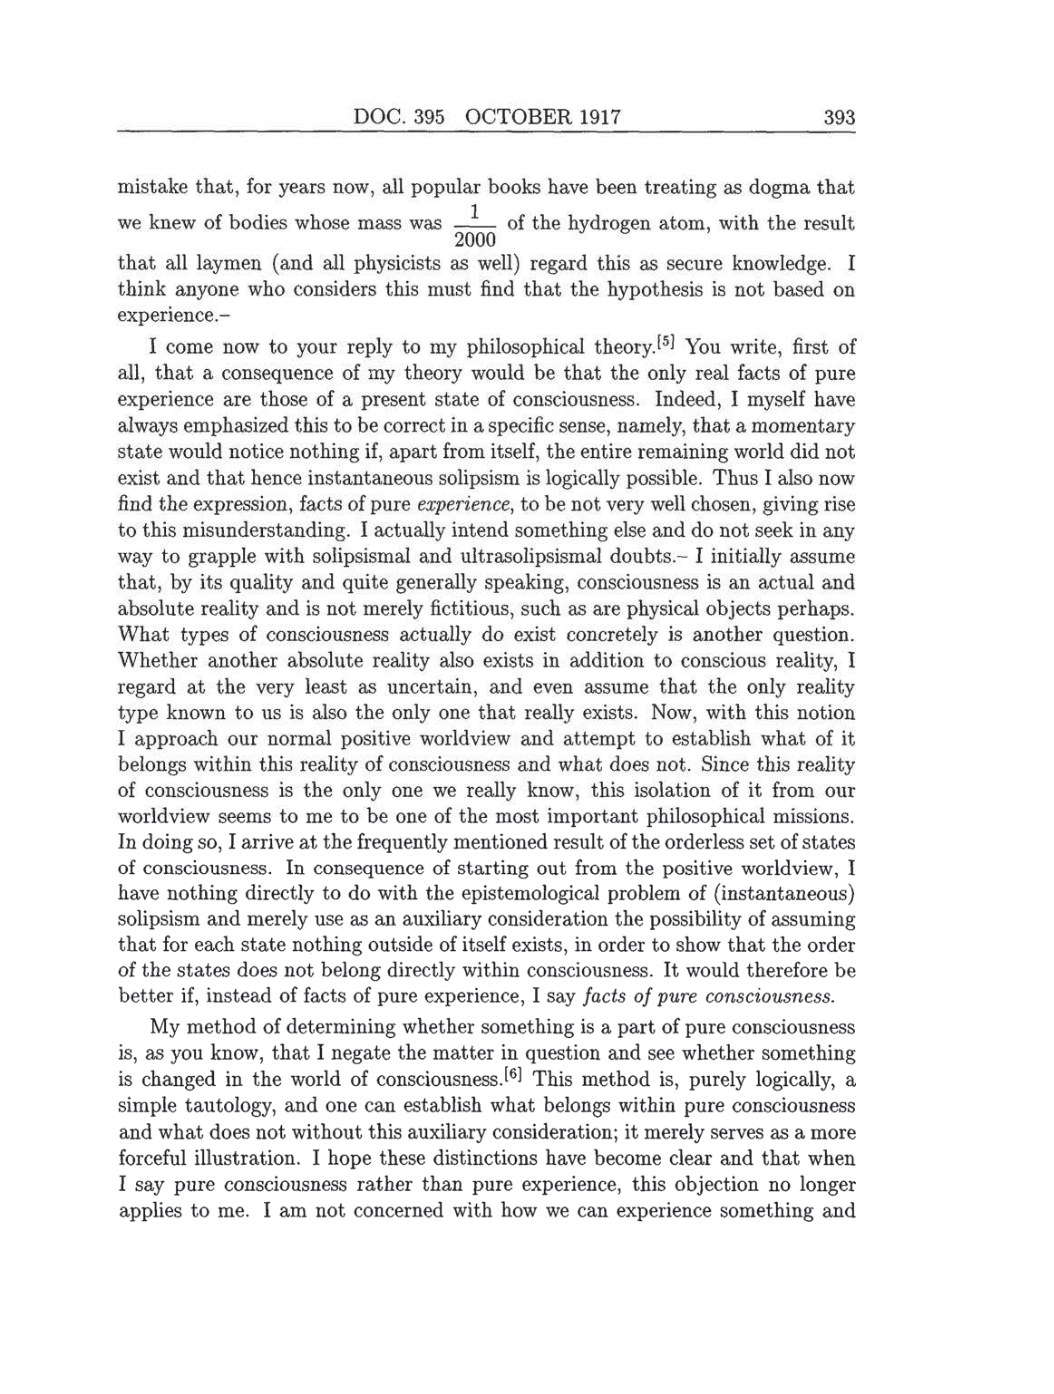 Volume 8: The Berlin Years: Correspondence, 1914-1918 (English translation supplement) page 393